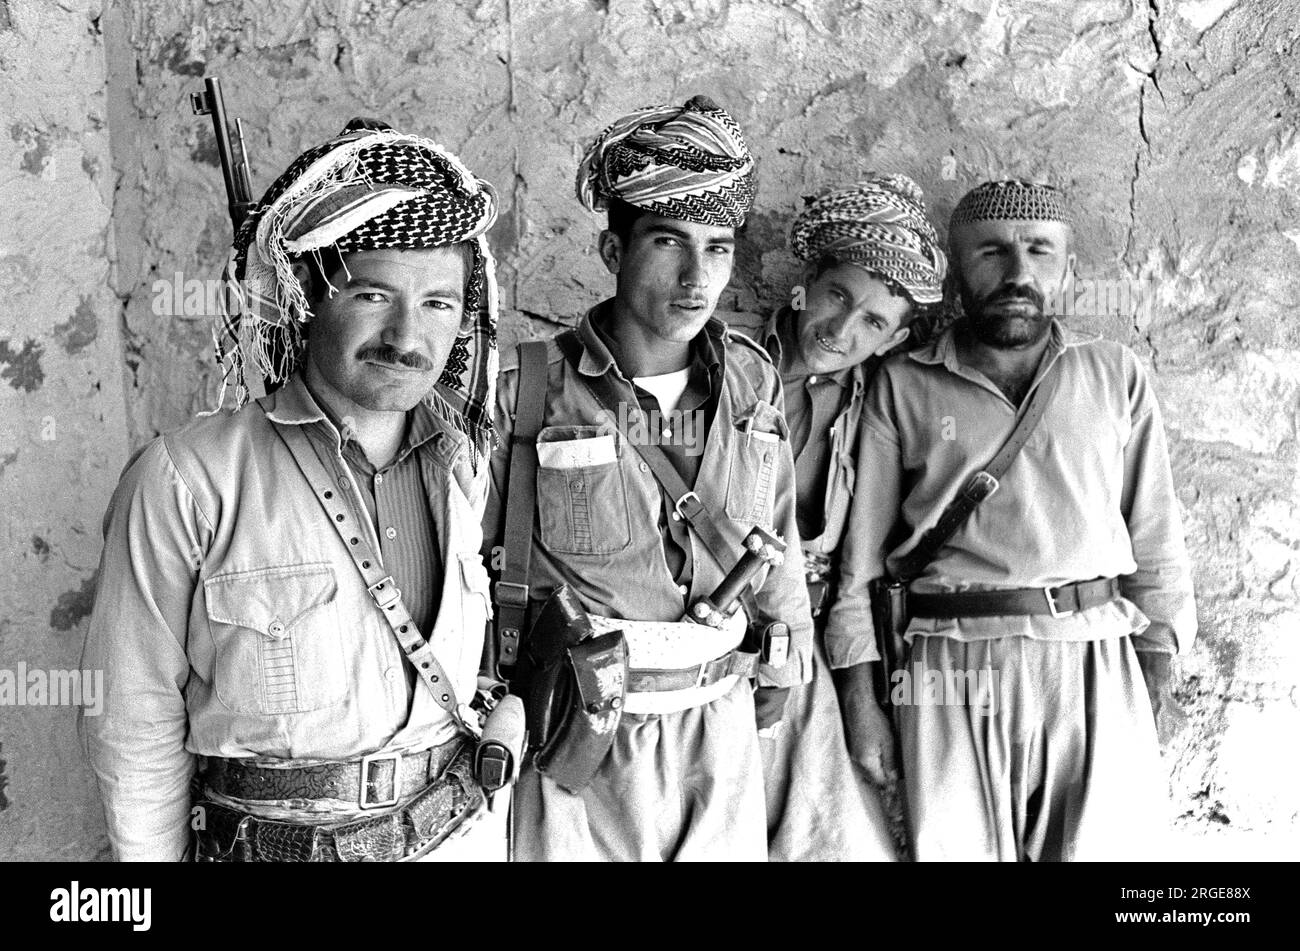 Mujaheddin soldiers of the Kurdish revolution led by Mustafa Barzani in Northern Iraq, photographed in Northern Iraq during a brief truce with the Iraqi government in 1969. Stock Photo